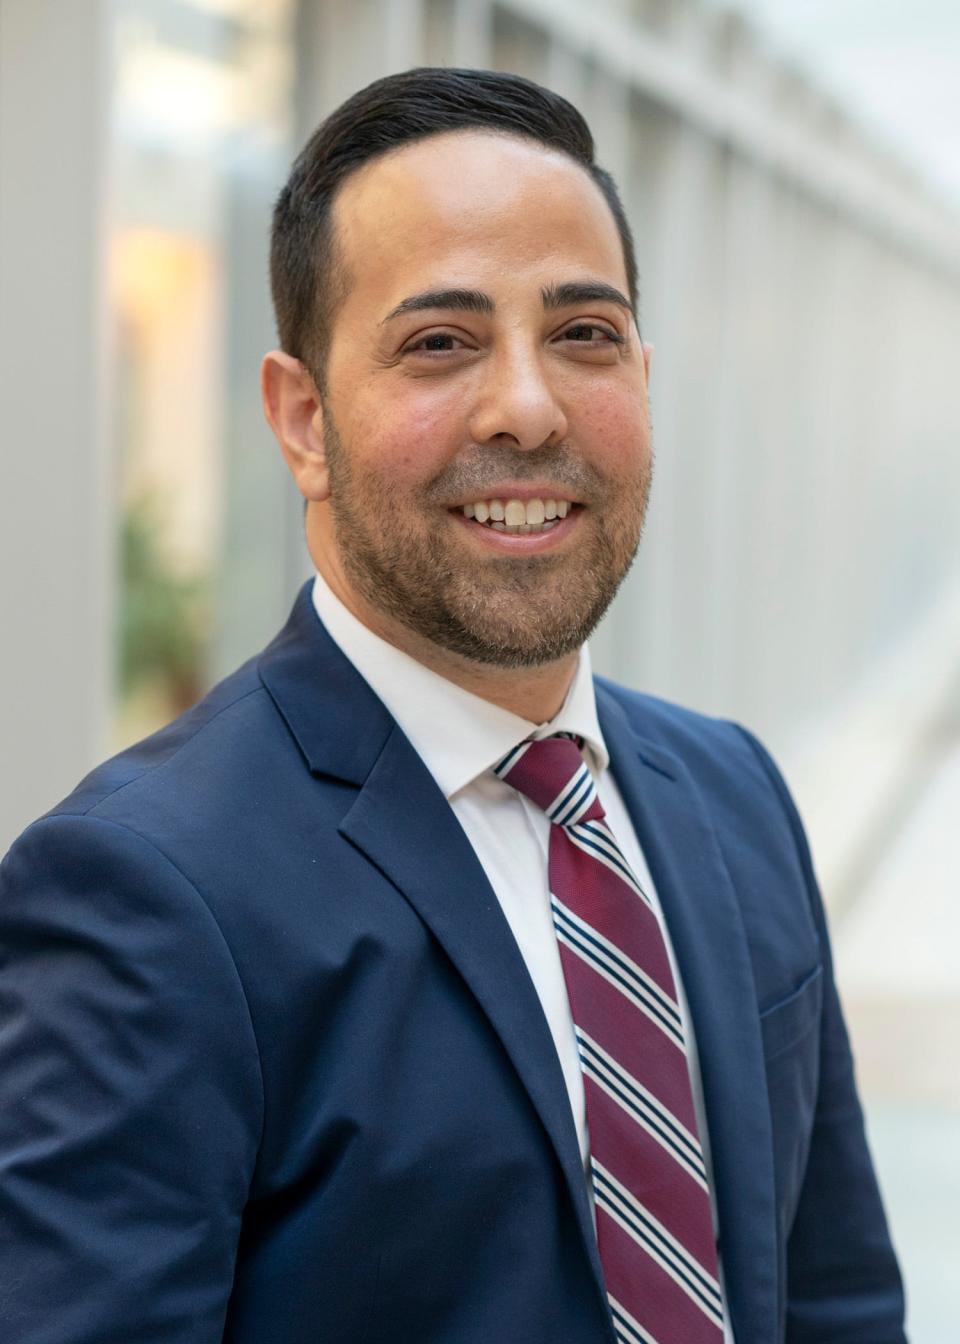 Perry Farhat is the new Director of Diversity & Inclusion and Administrative Director of the Babs Siperstein PROUD Center.